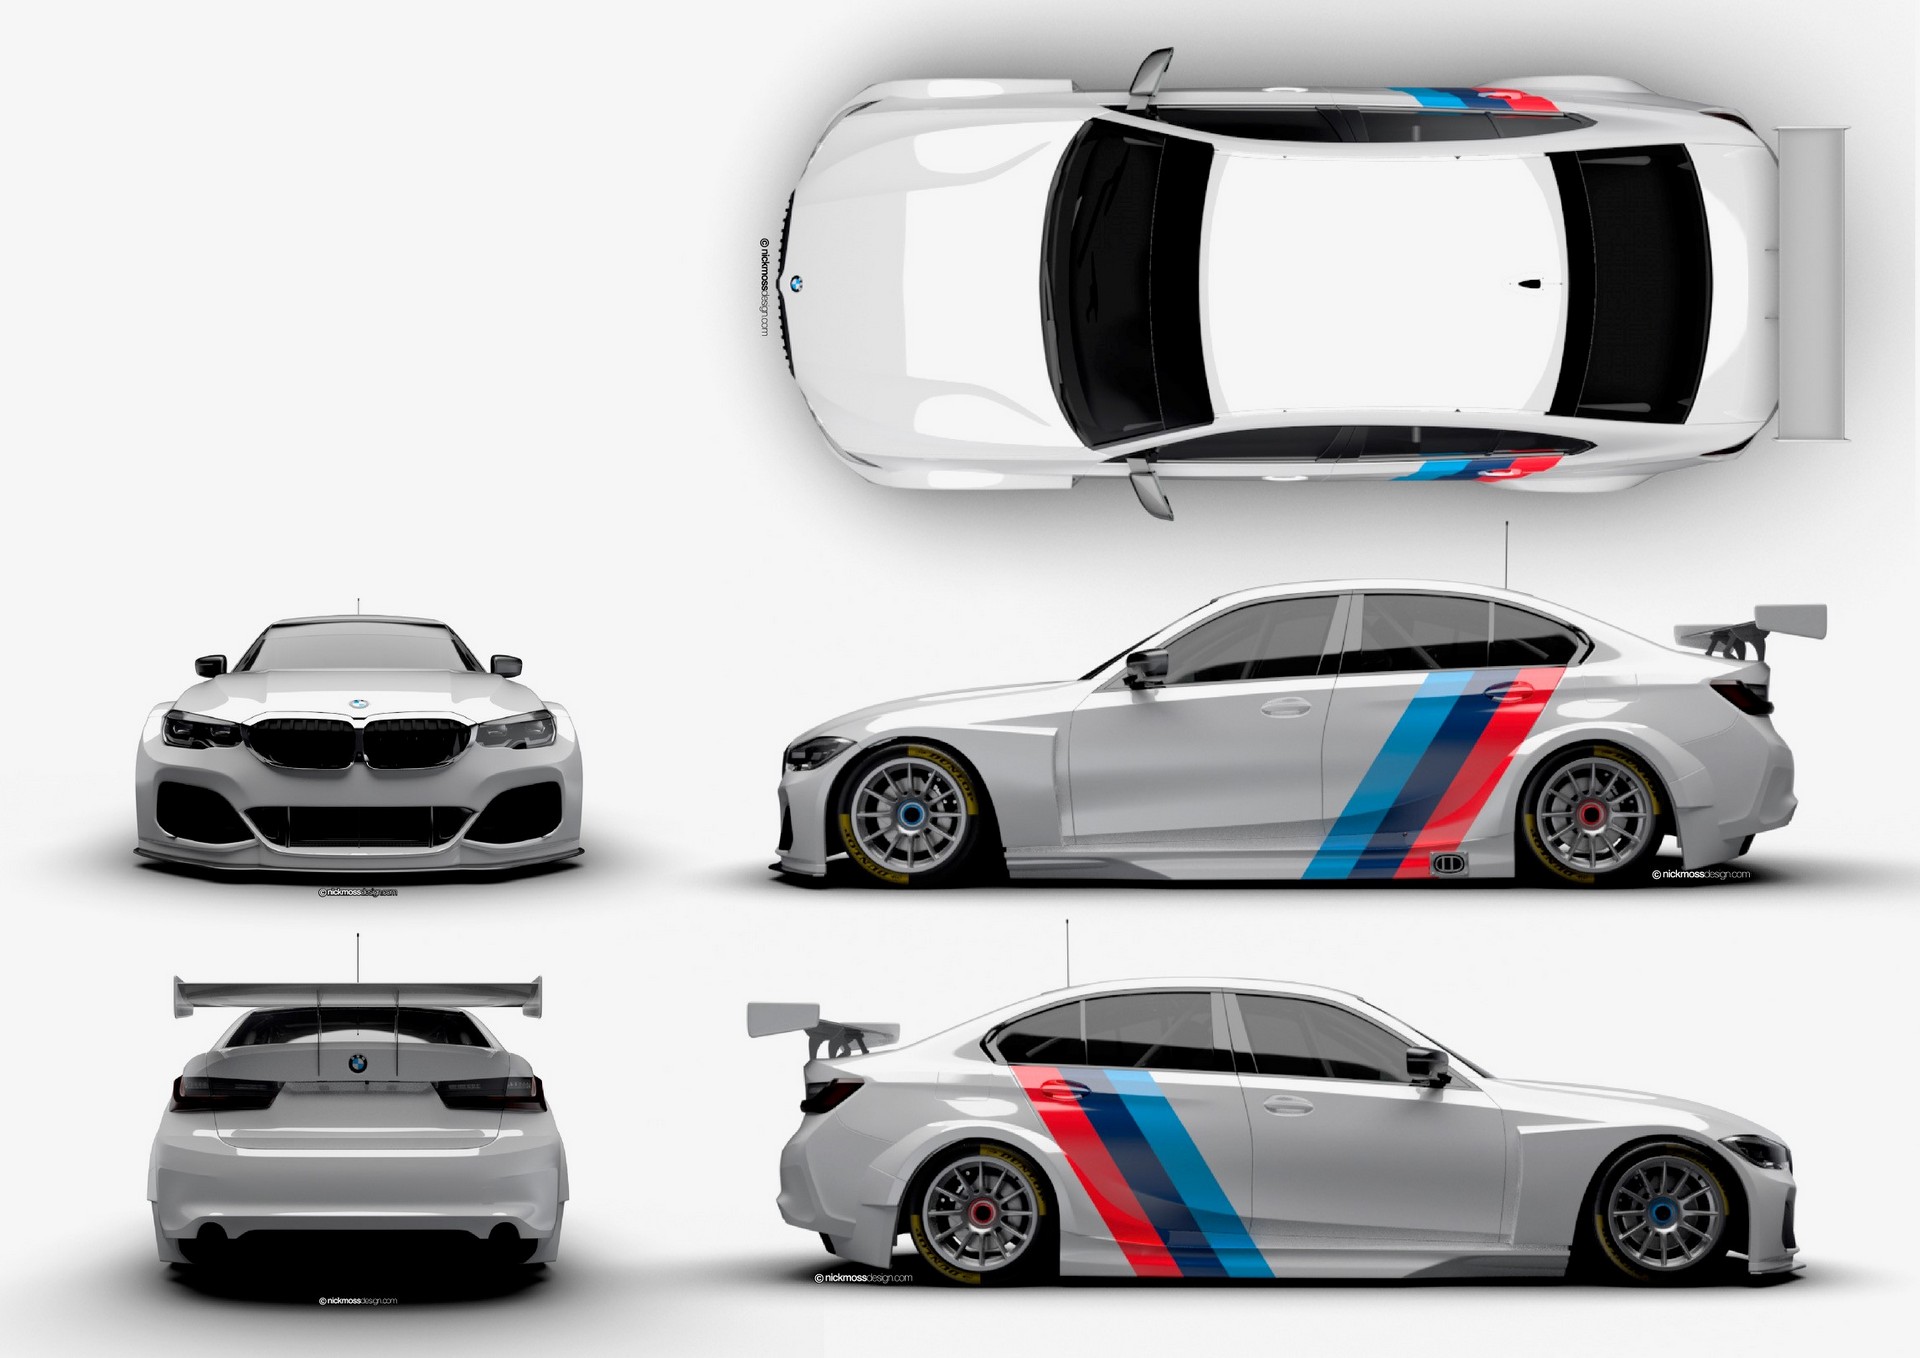 New 2020 Bmw 3 Series Suits Up For British Touring Car Championship Carscoops